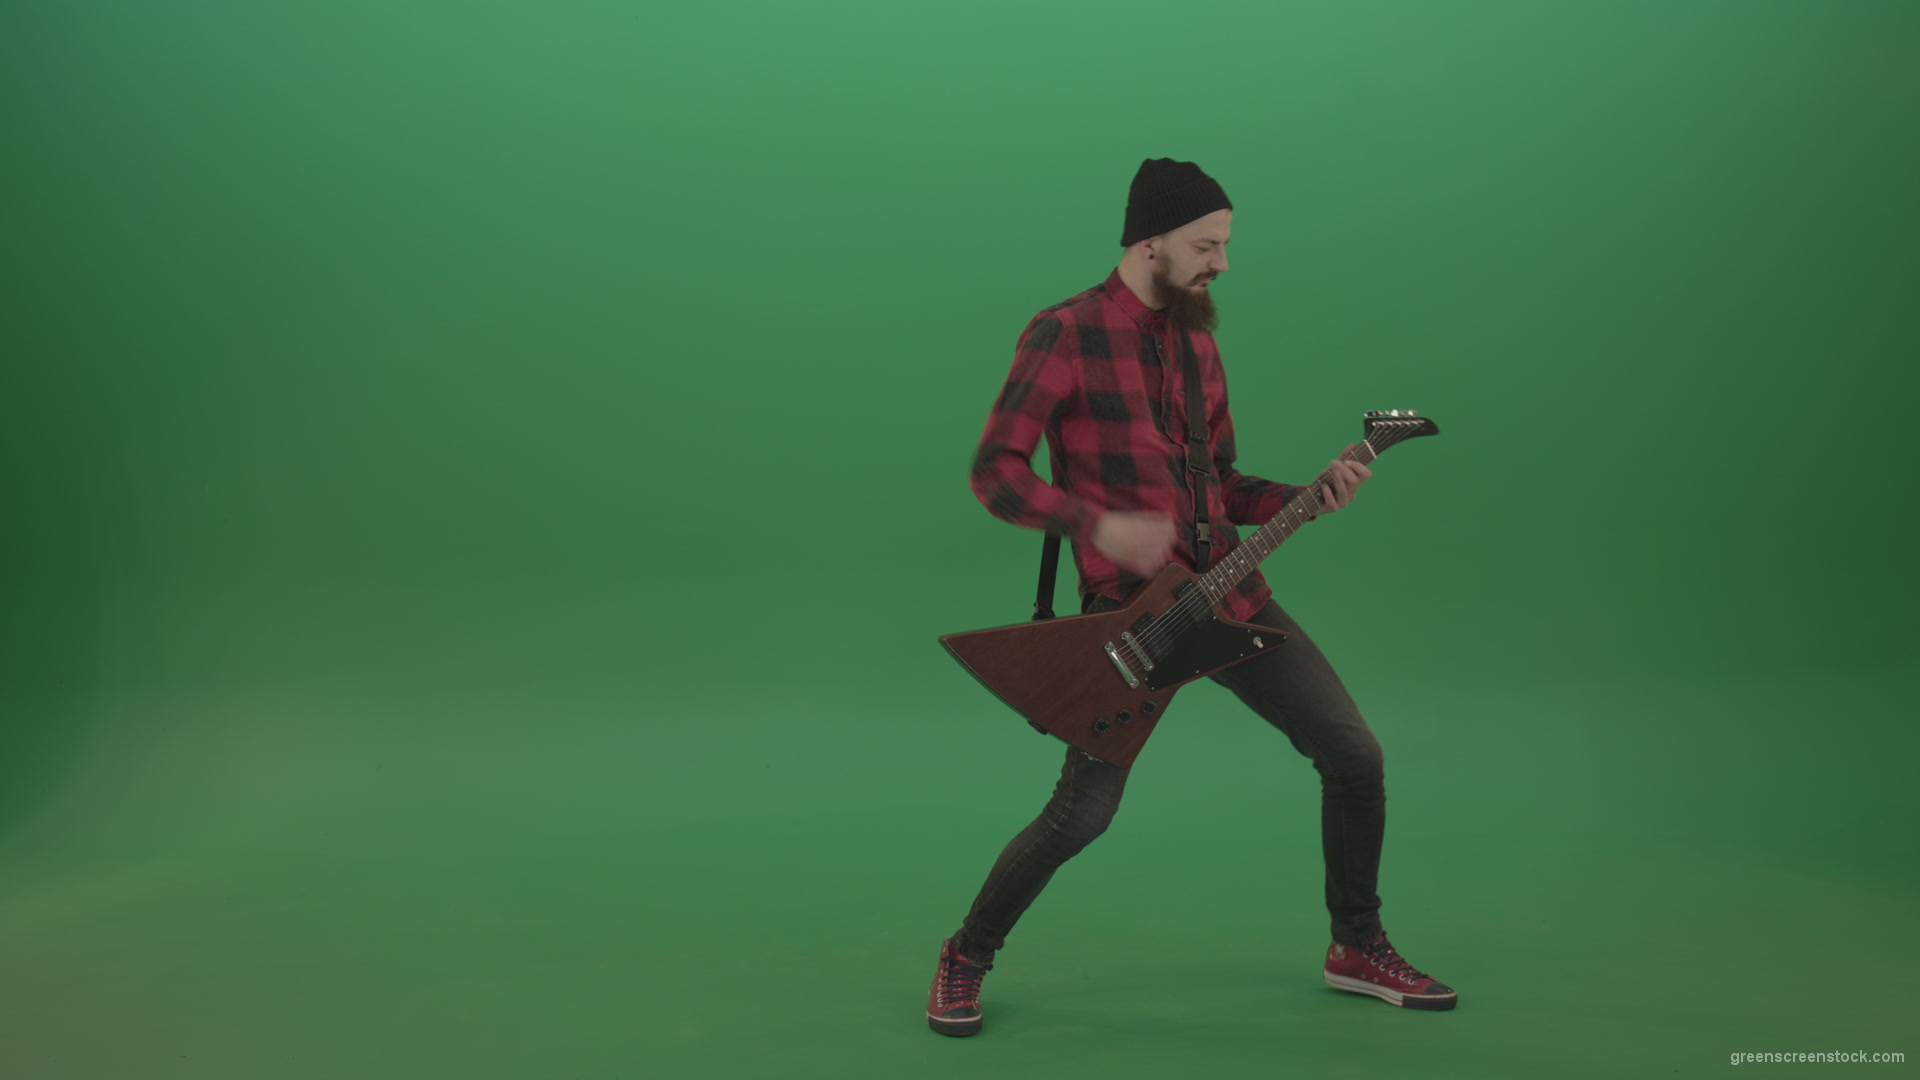 Punk-rock-full-size-man-guitarist-play-guitar-with-emotions-on-green-screen_008 Green Screen Stock